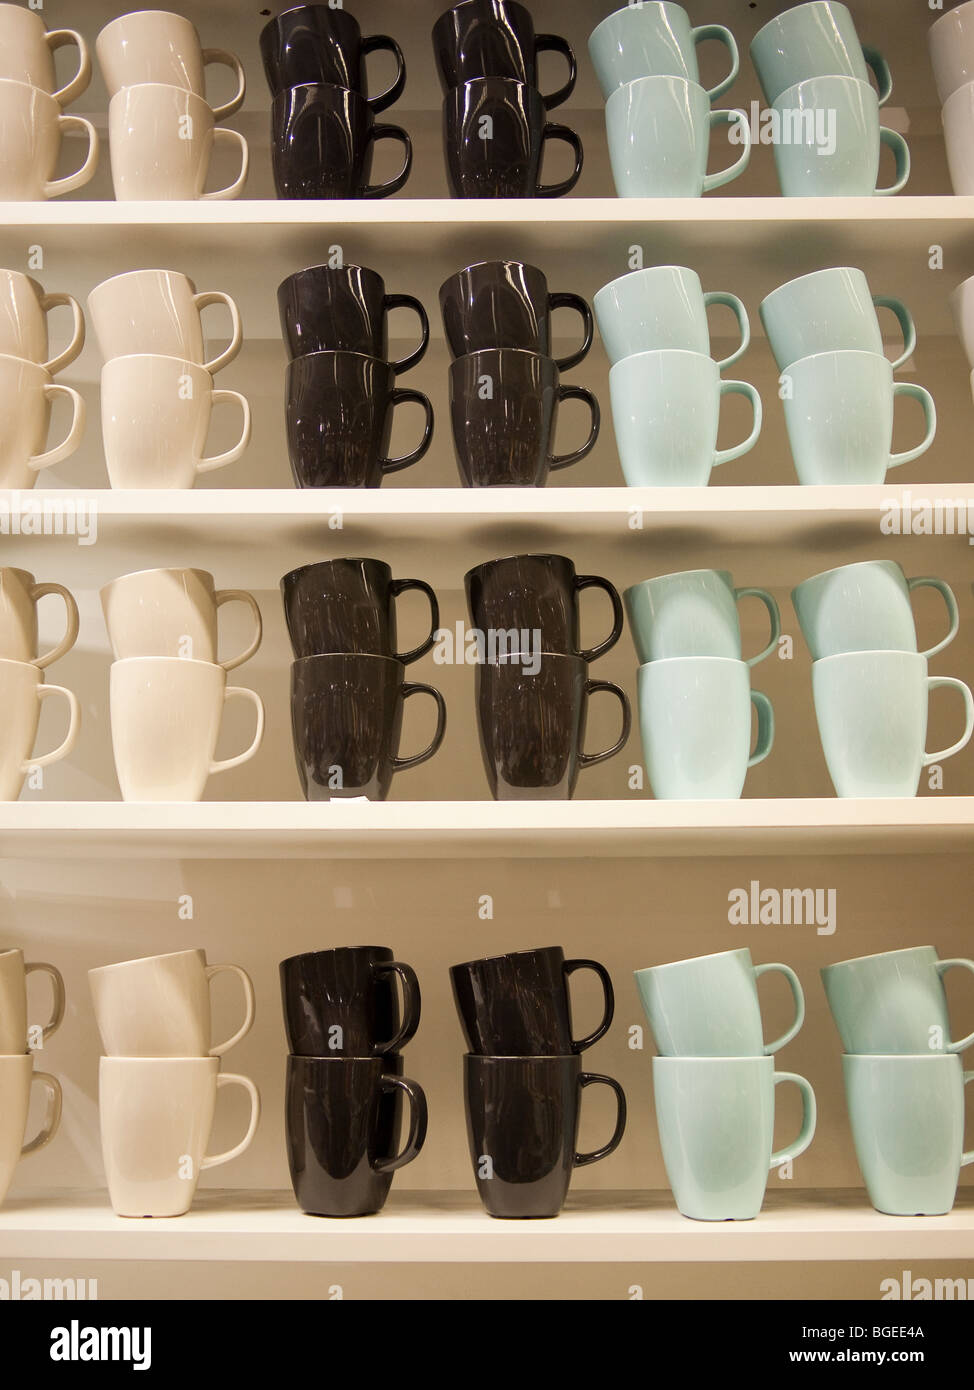 Rows of coloured cups on shelves Stock Photo